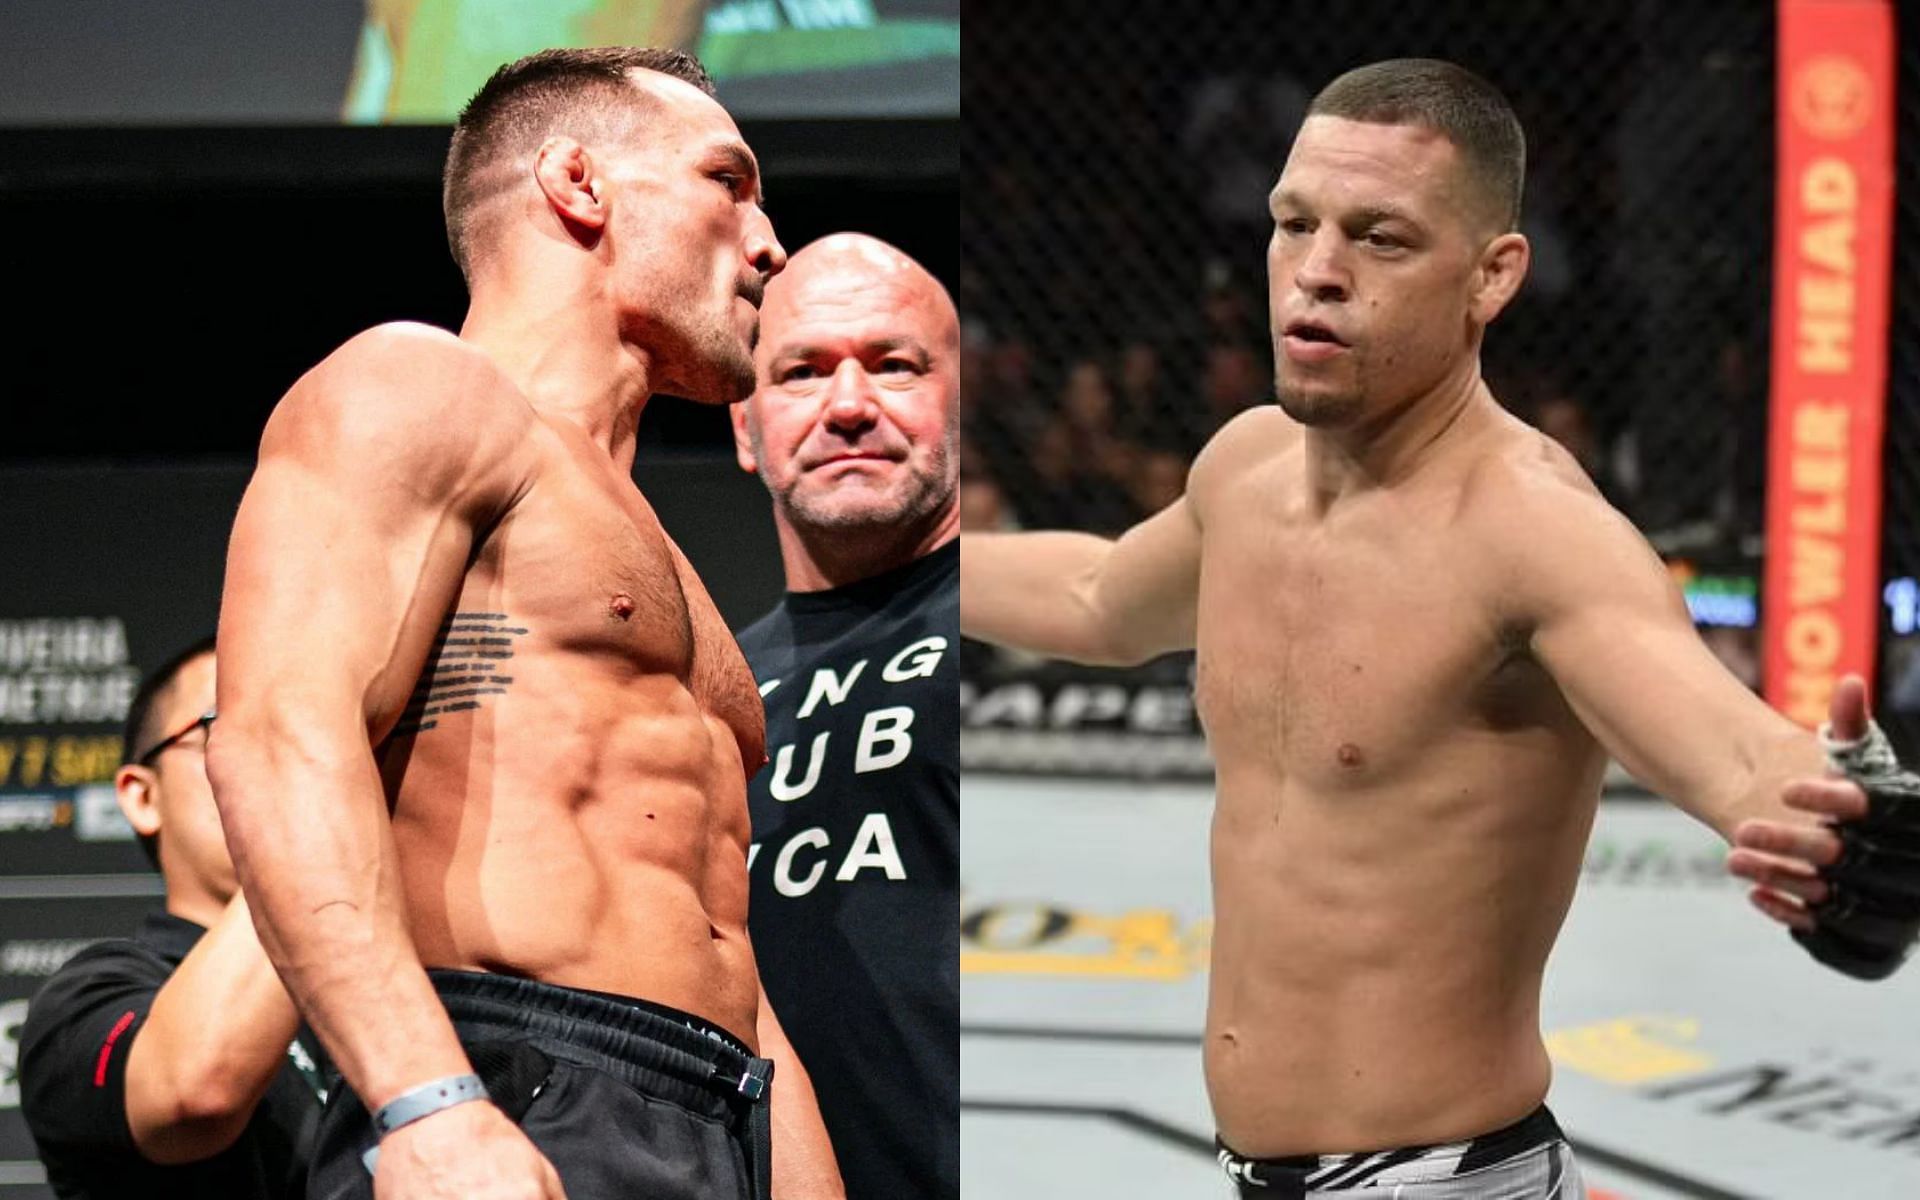 Michael Chandler (left) and Nate Diaz (right)